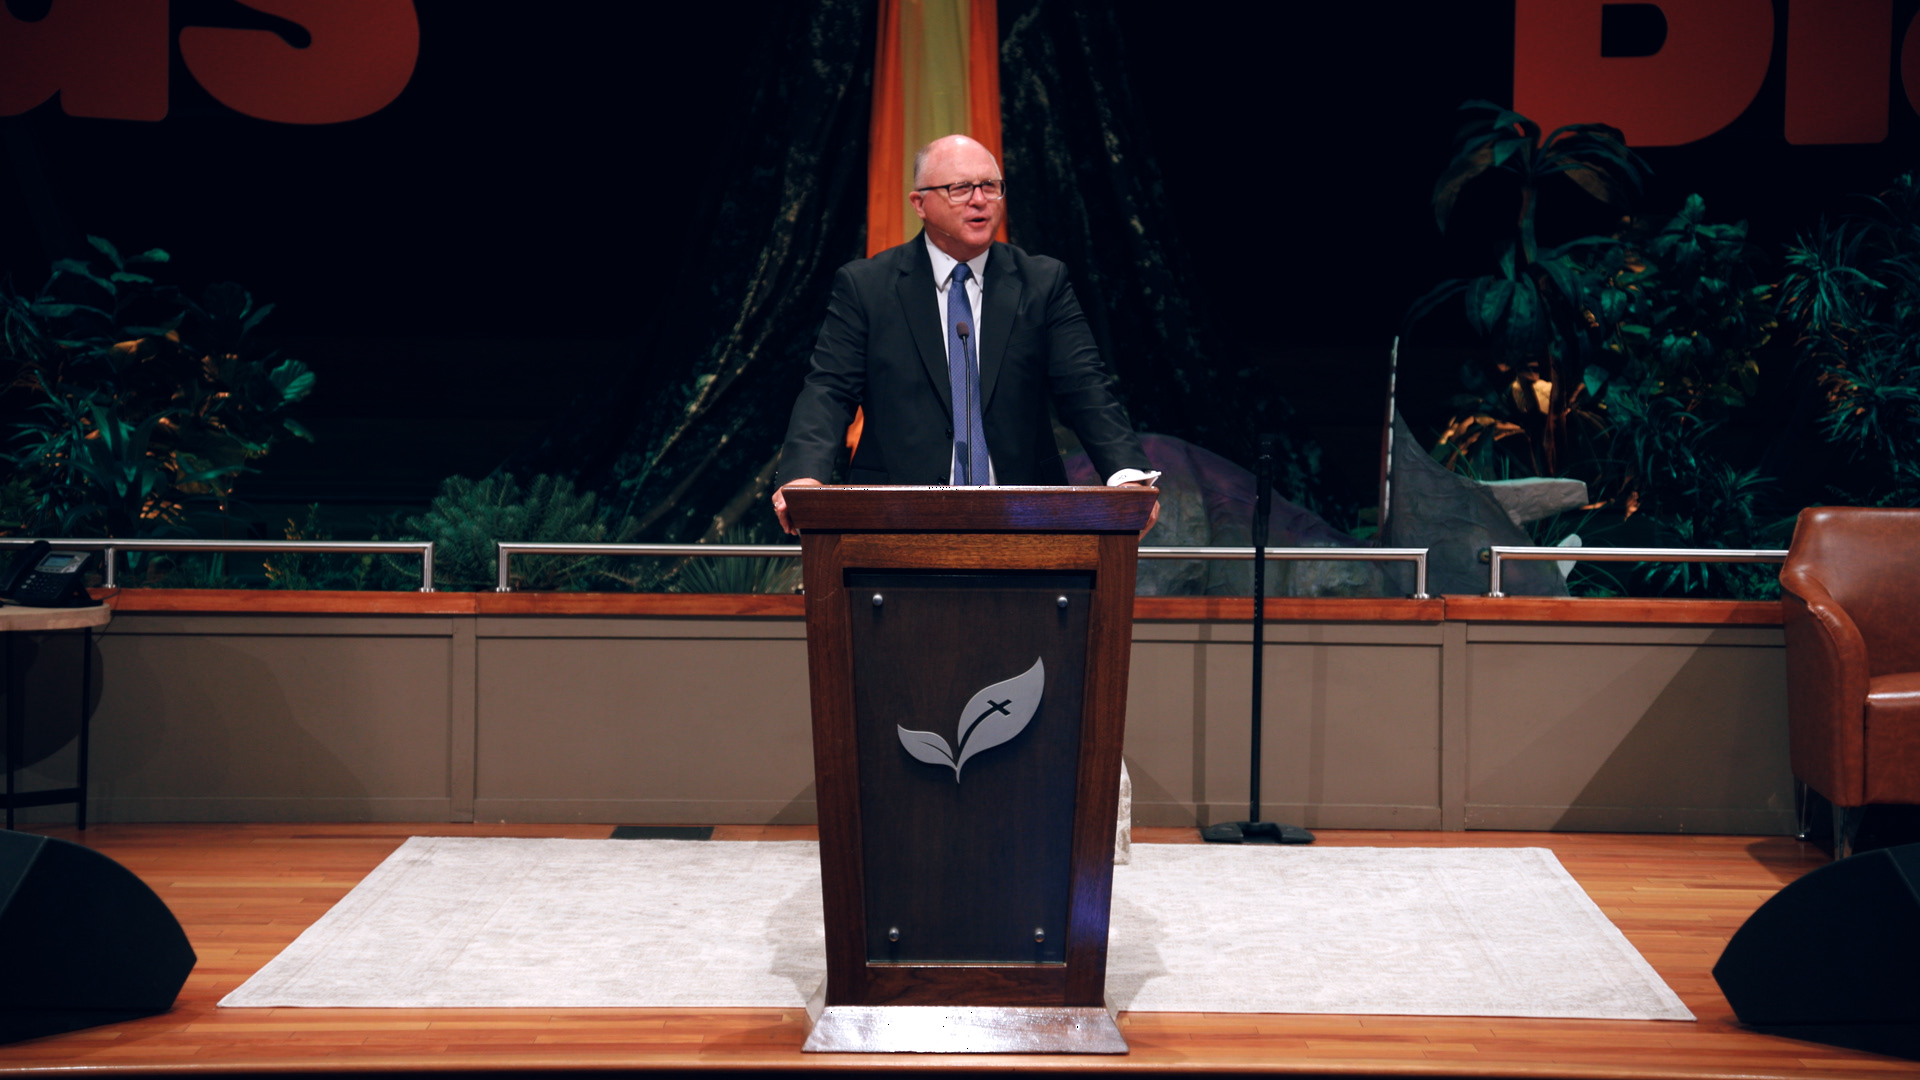 Pastor Paul Chappell: Courageous In The Race